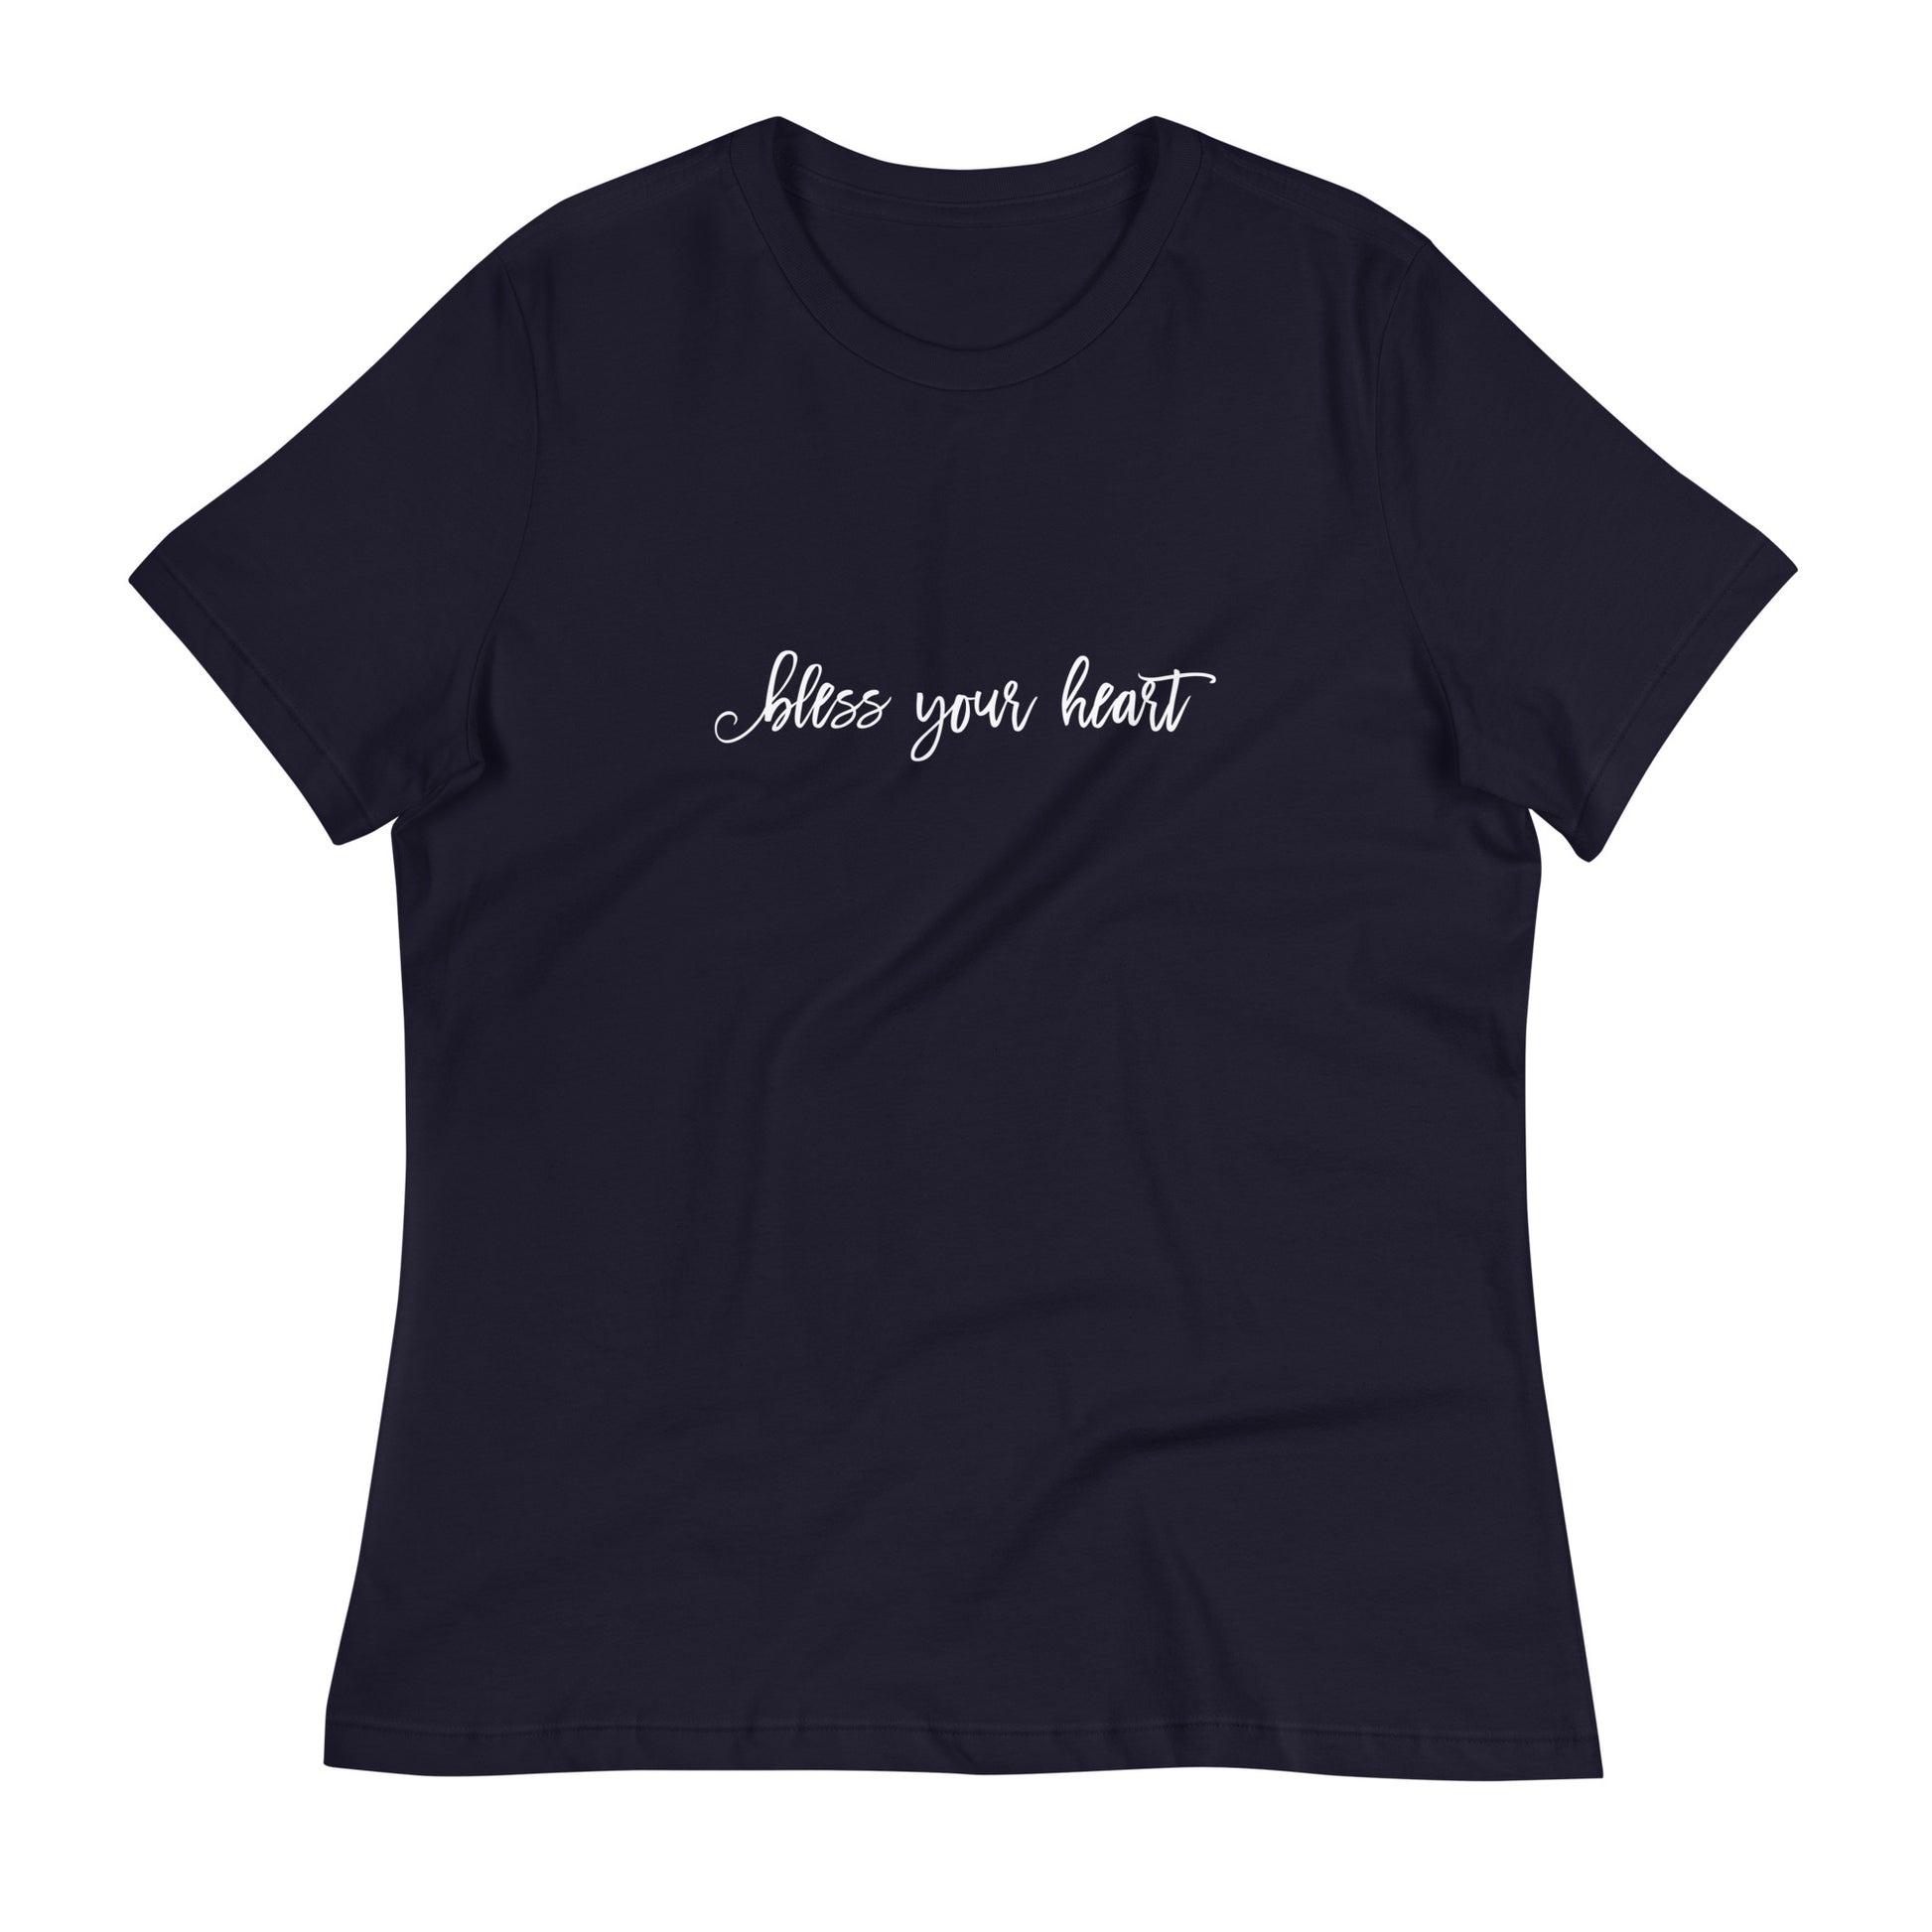 Navy women's relaxed fit t-shirt with white graphic in an excessively twee font: "bless your heart"